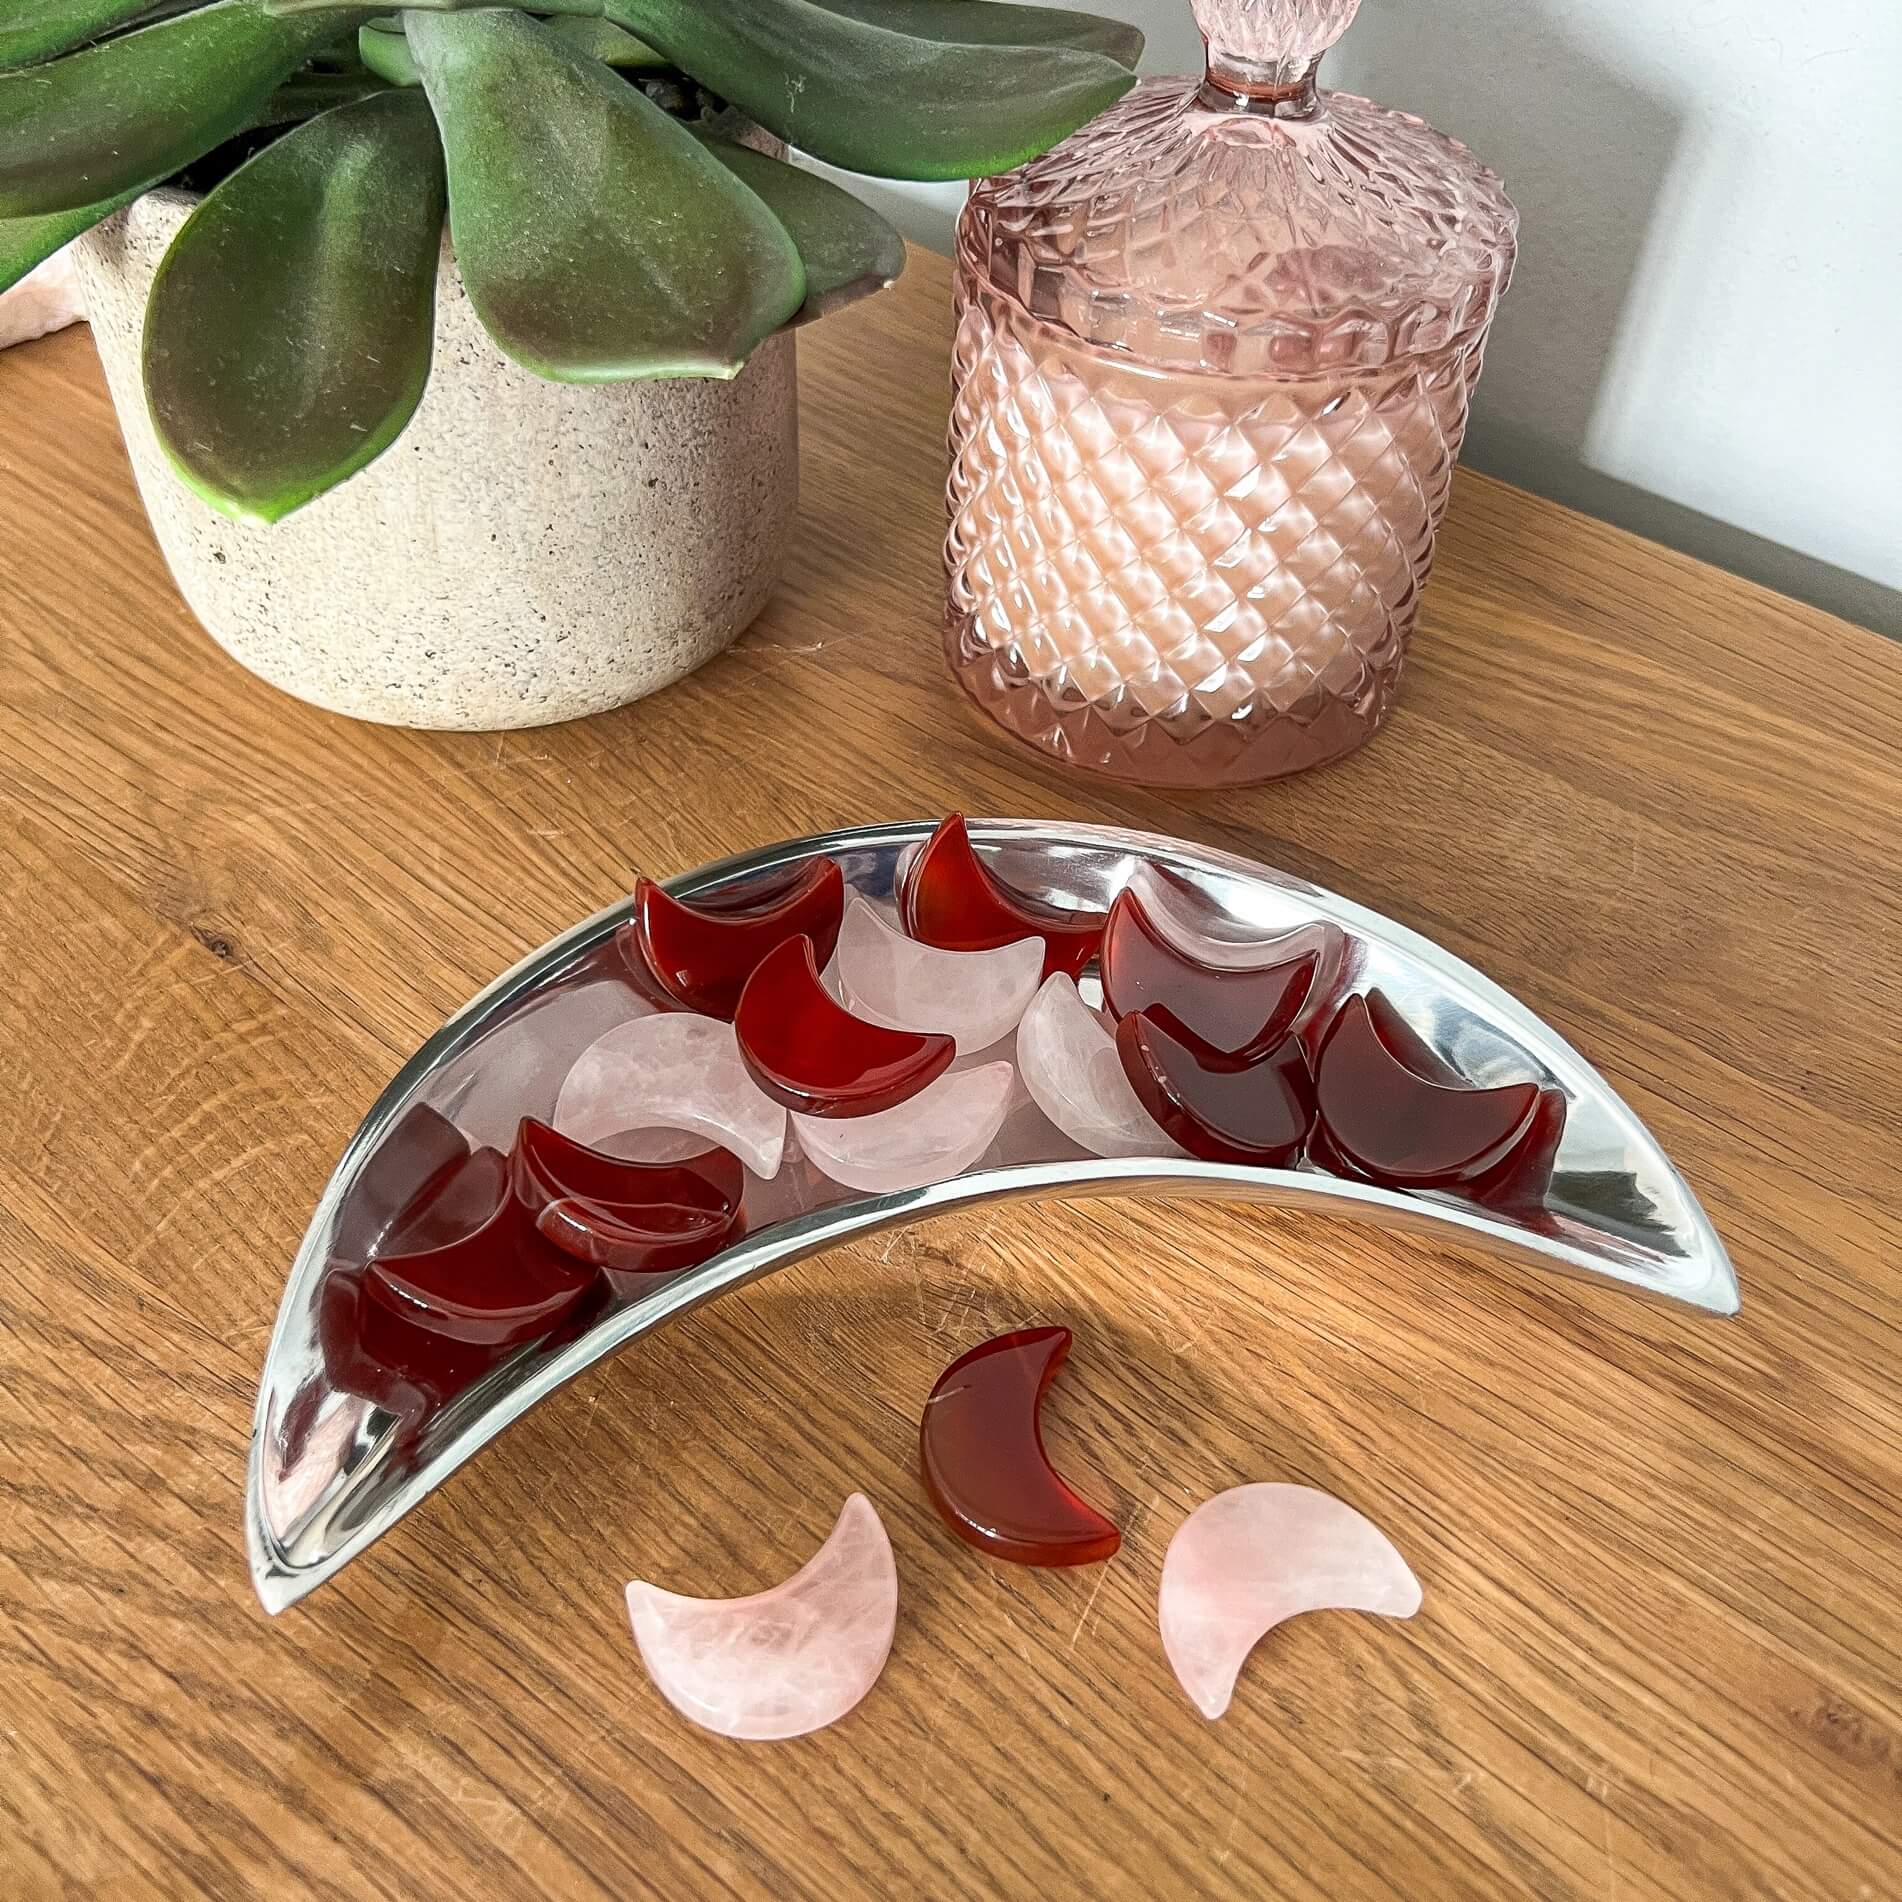 A silver moon dish filled with red carnelian crystal and pink rose quartz crystal moon decorations